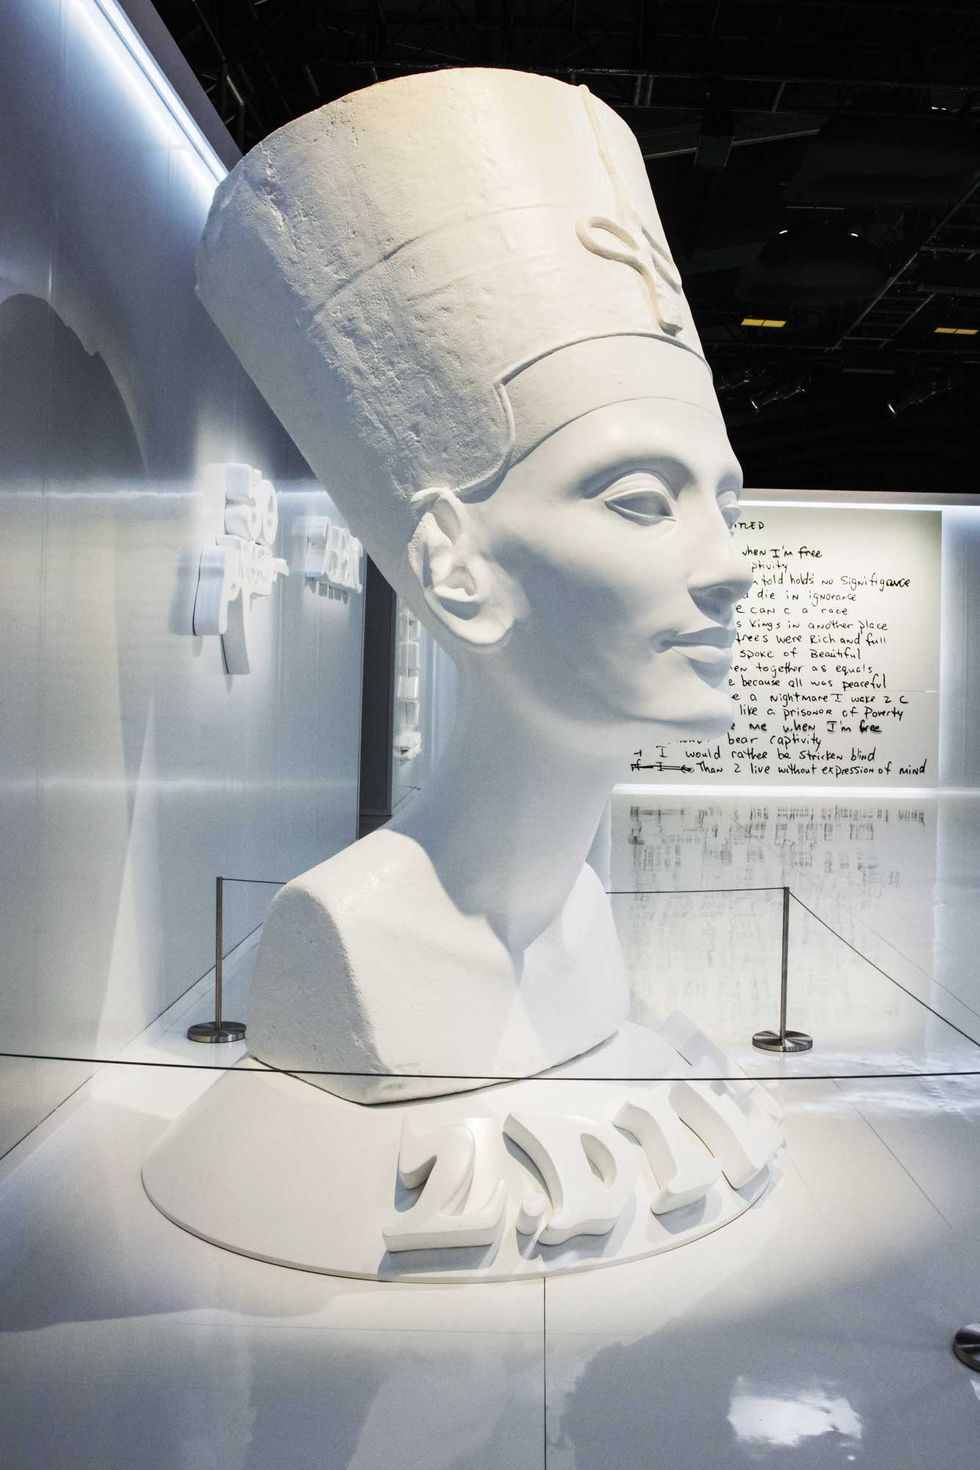 the exhibit tupac shakur, wake me when i’m free opens with sculptural representations of several of his tattoos, including queen nefertiti, shakur chose this symbol of feminine power in homage to his mother, political activist afeni shakur davis